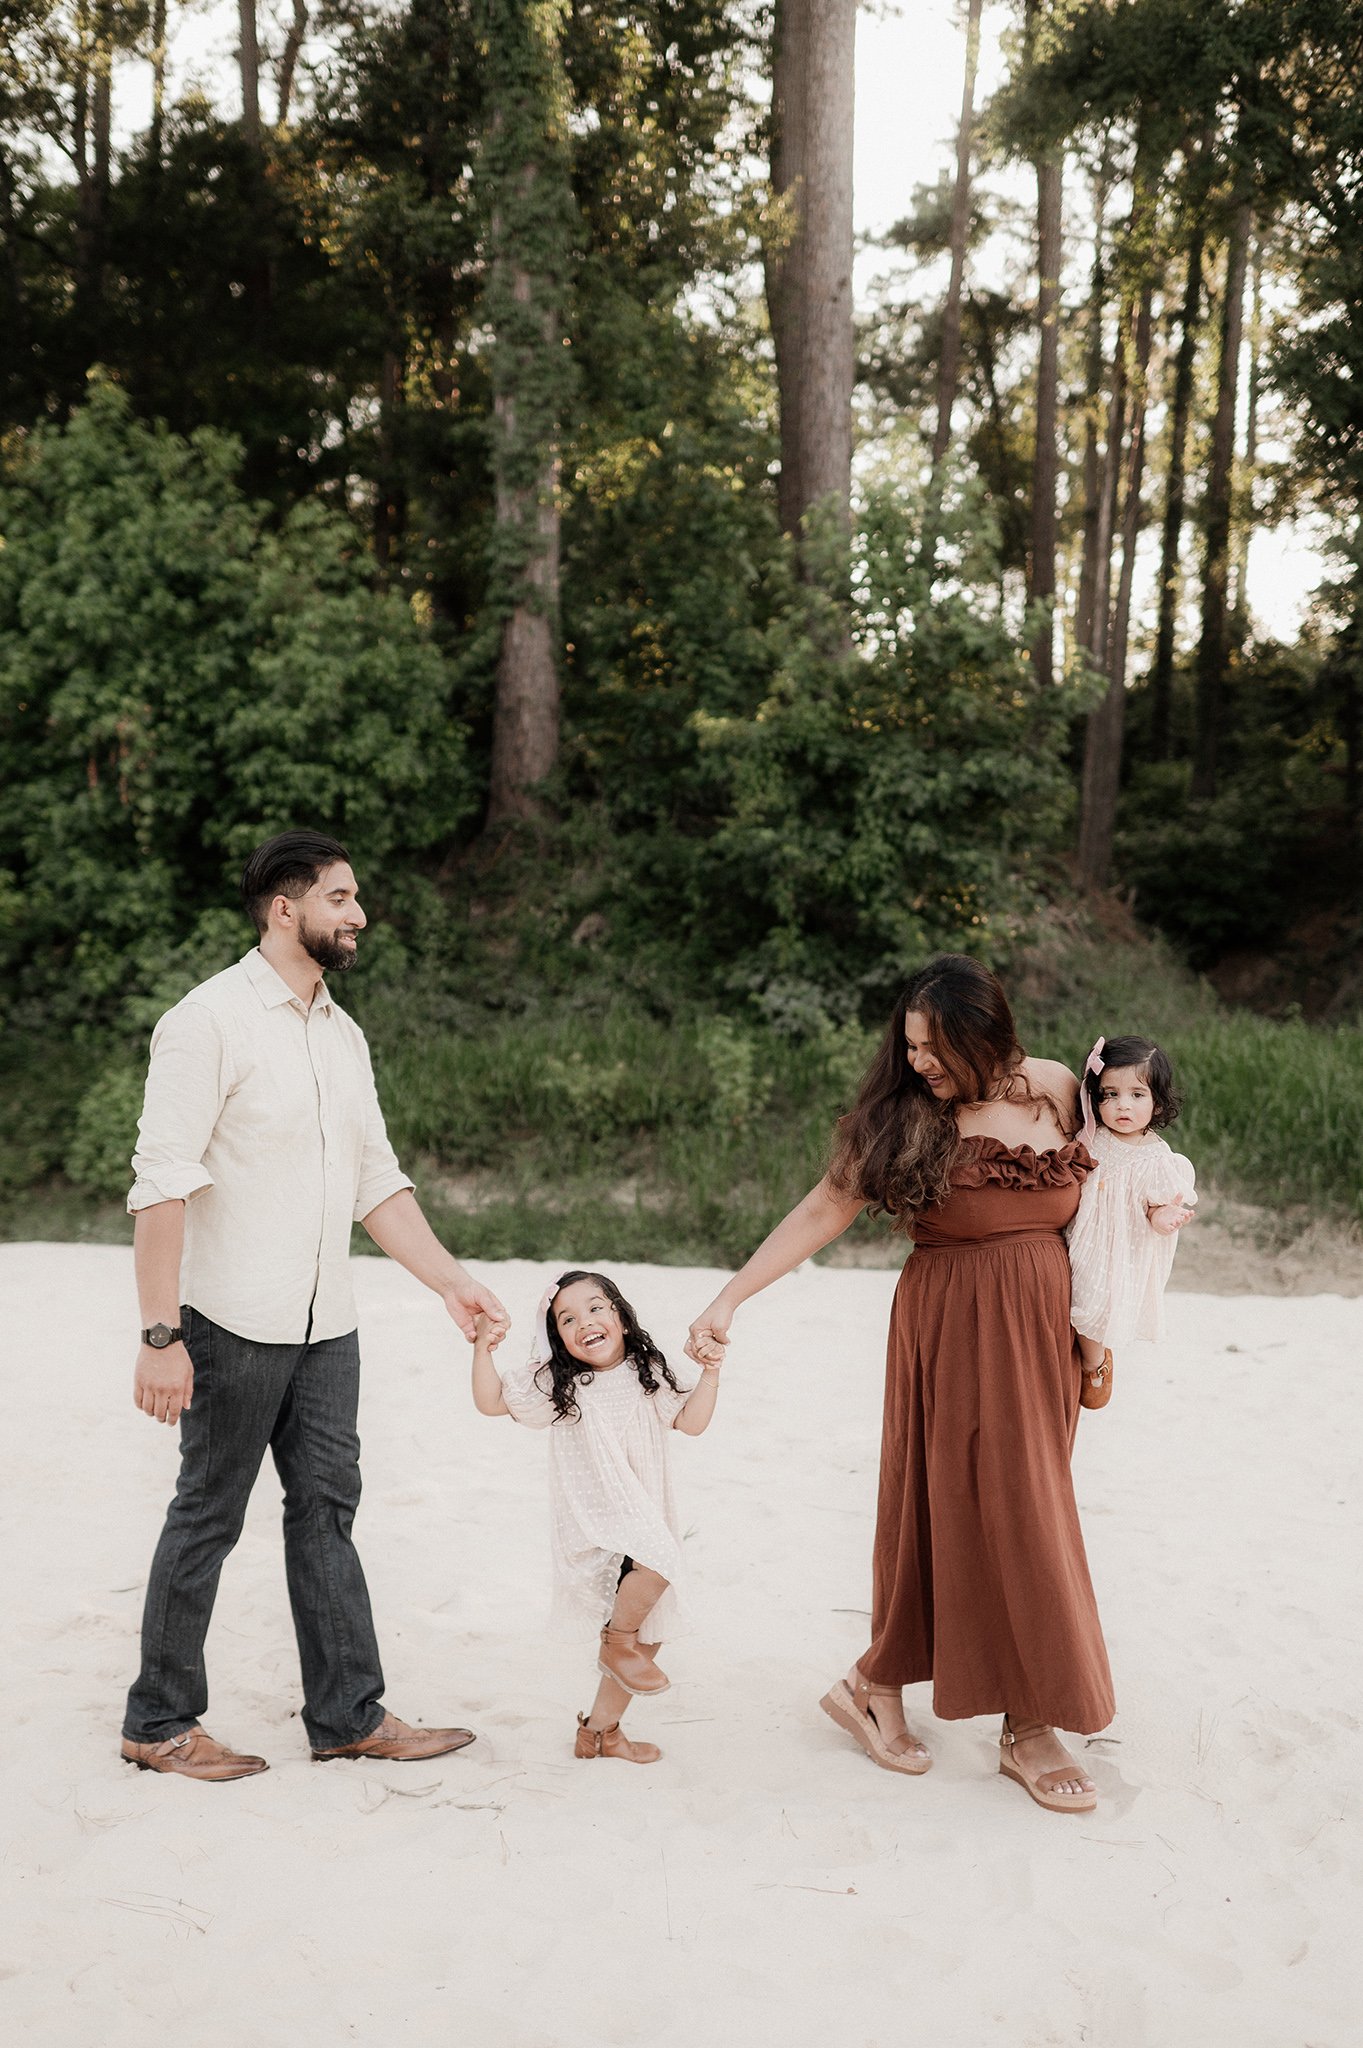 the woodlands family photographer _ conroe photographer _ houston family photographer _ ashley gillen photography _ texas family photographer _ conroe wedding photographer _ conroe texas _ cshi49.jpg